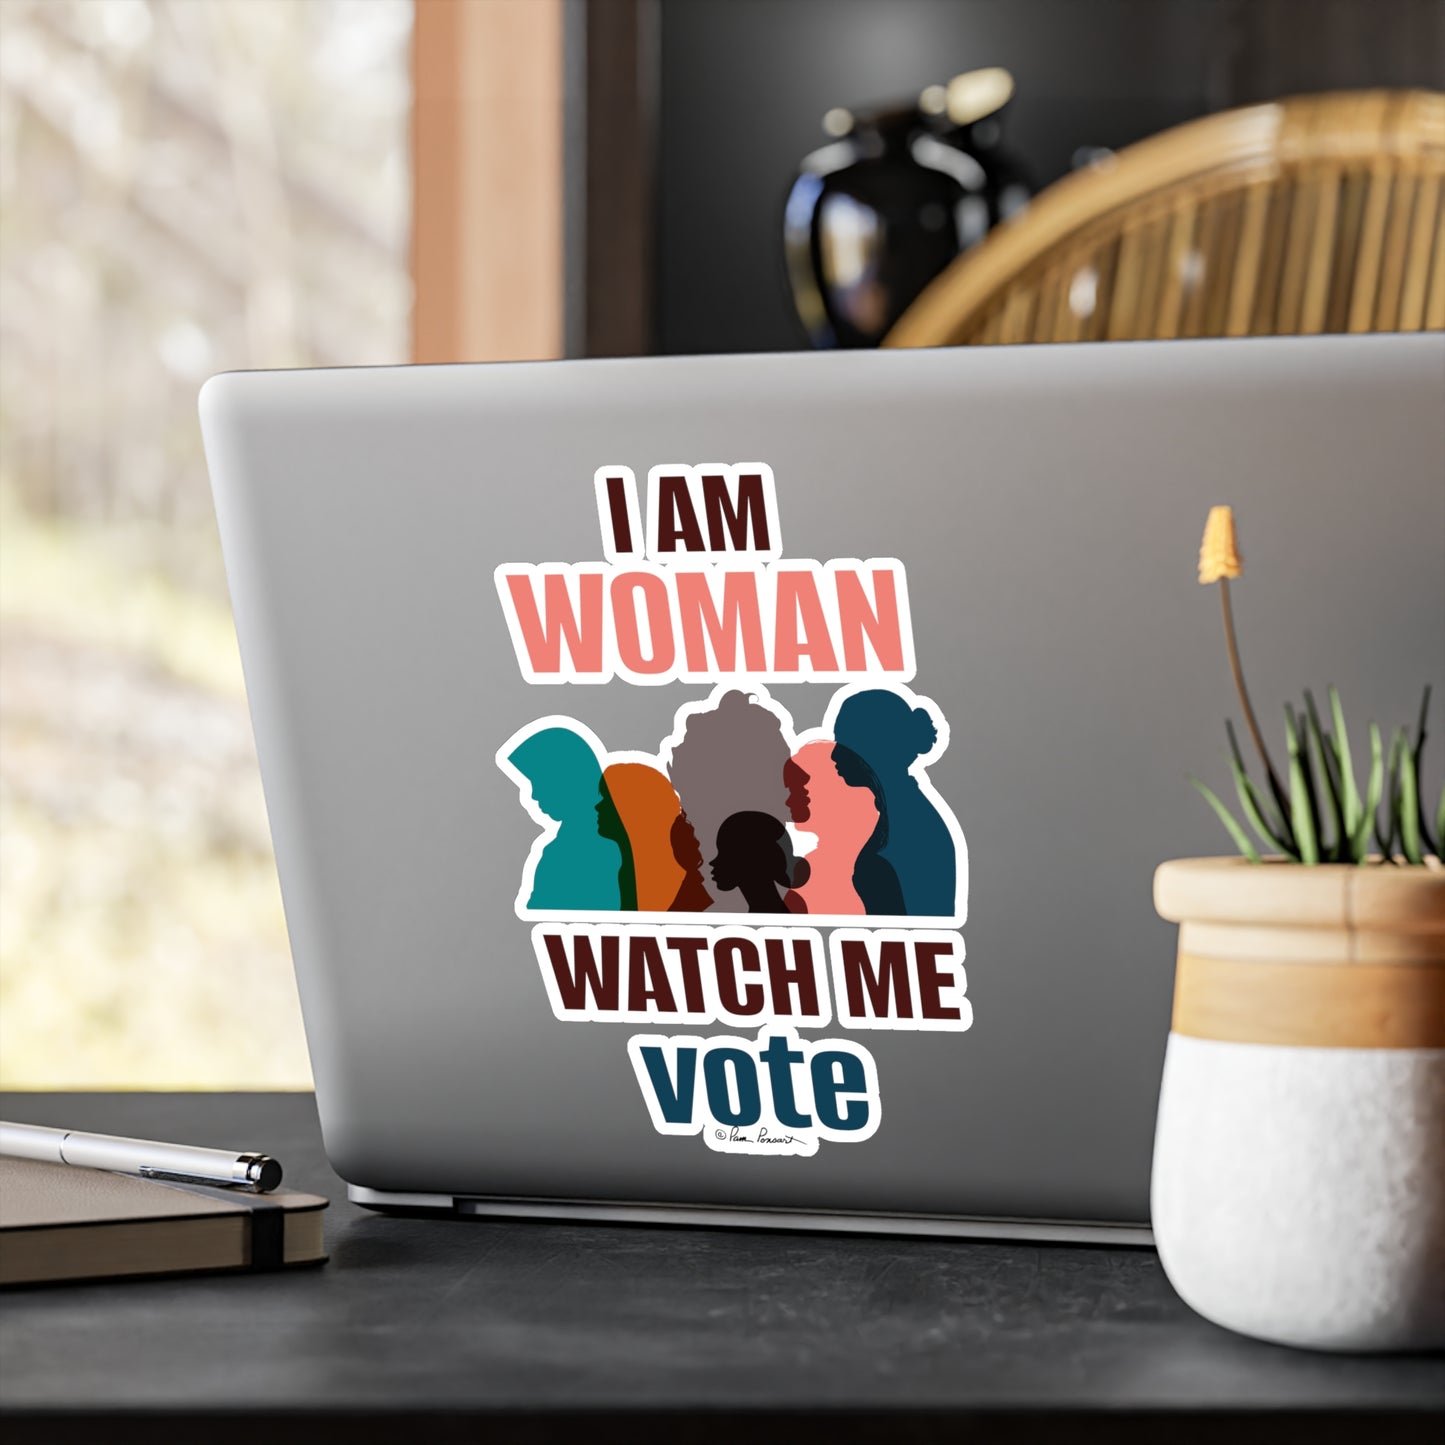 A laptop with a white Voting Women's Decals sticker by Printify featuring silhouettes of women saying "i am woman watch me vote" placed on a desk near a window.